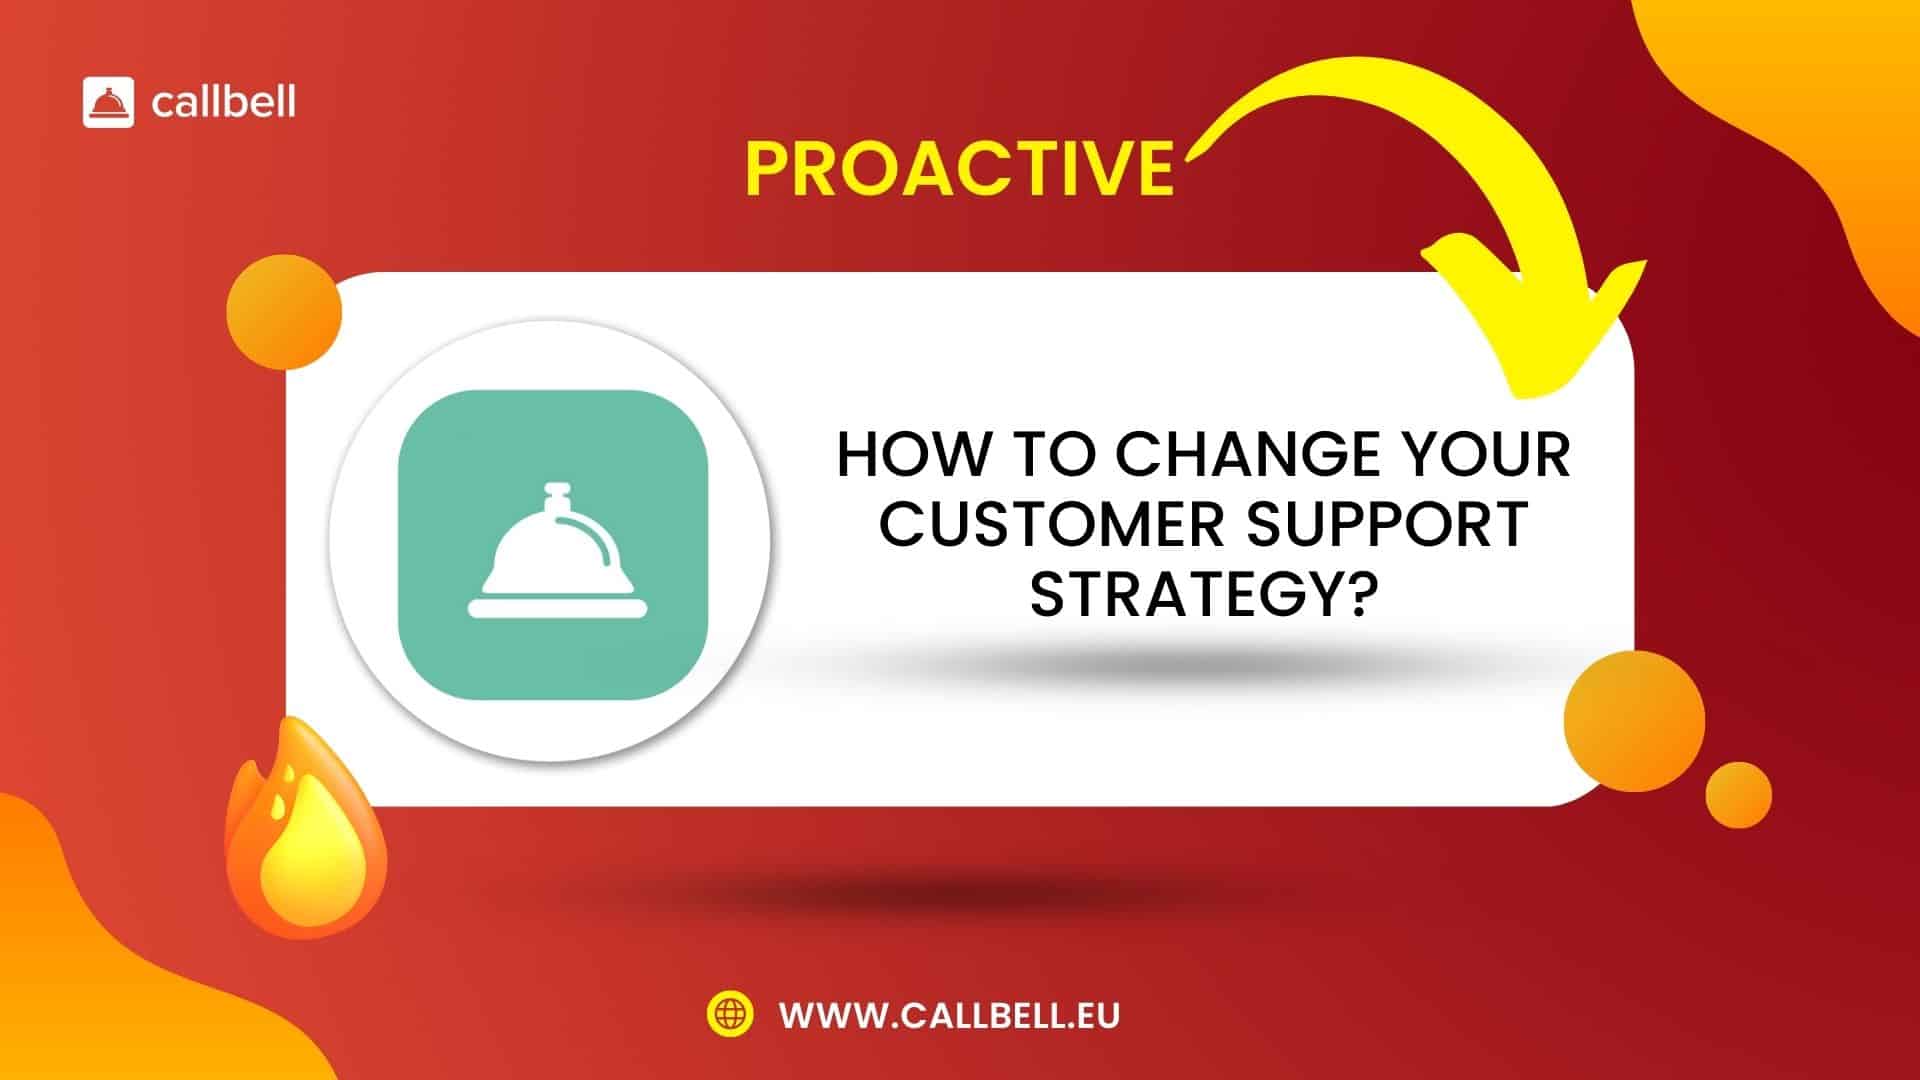 Change your customer support strategy